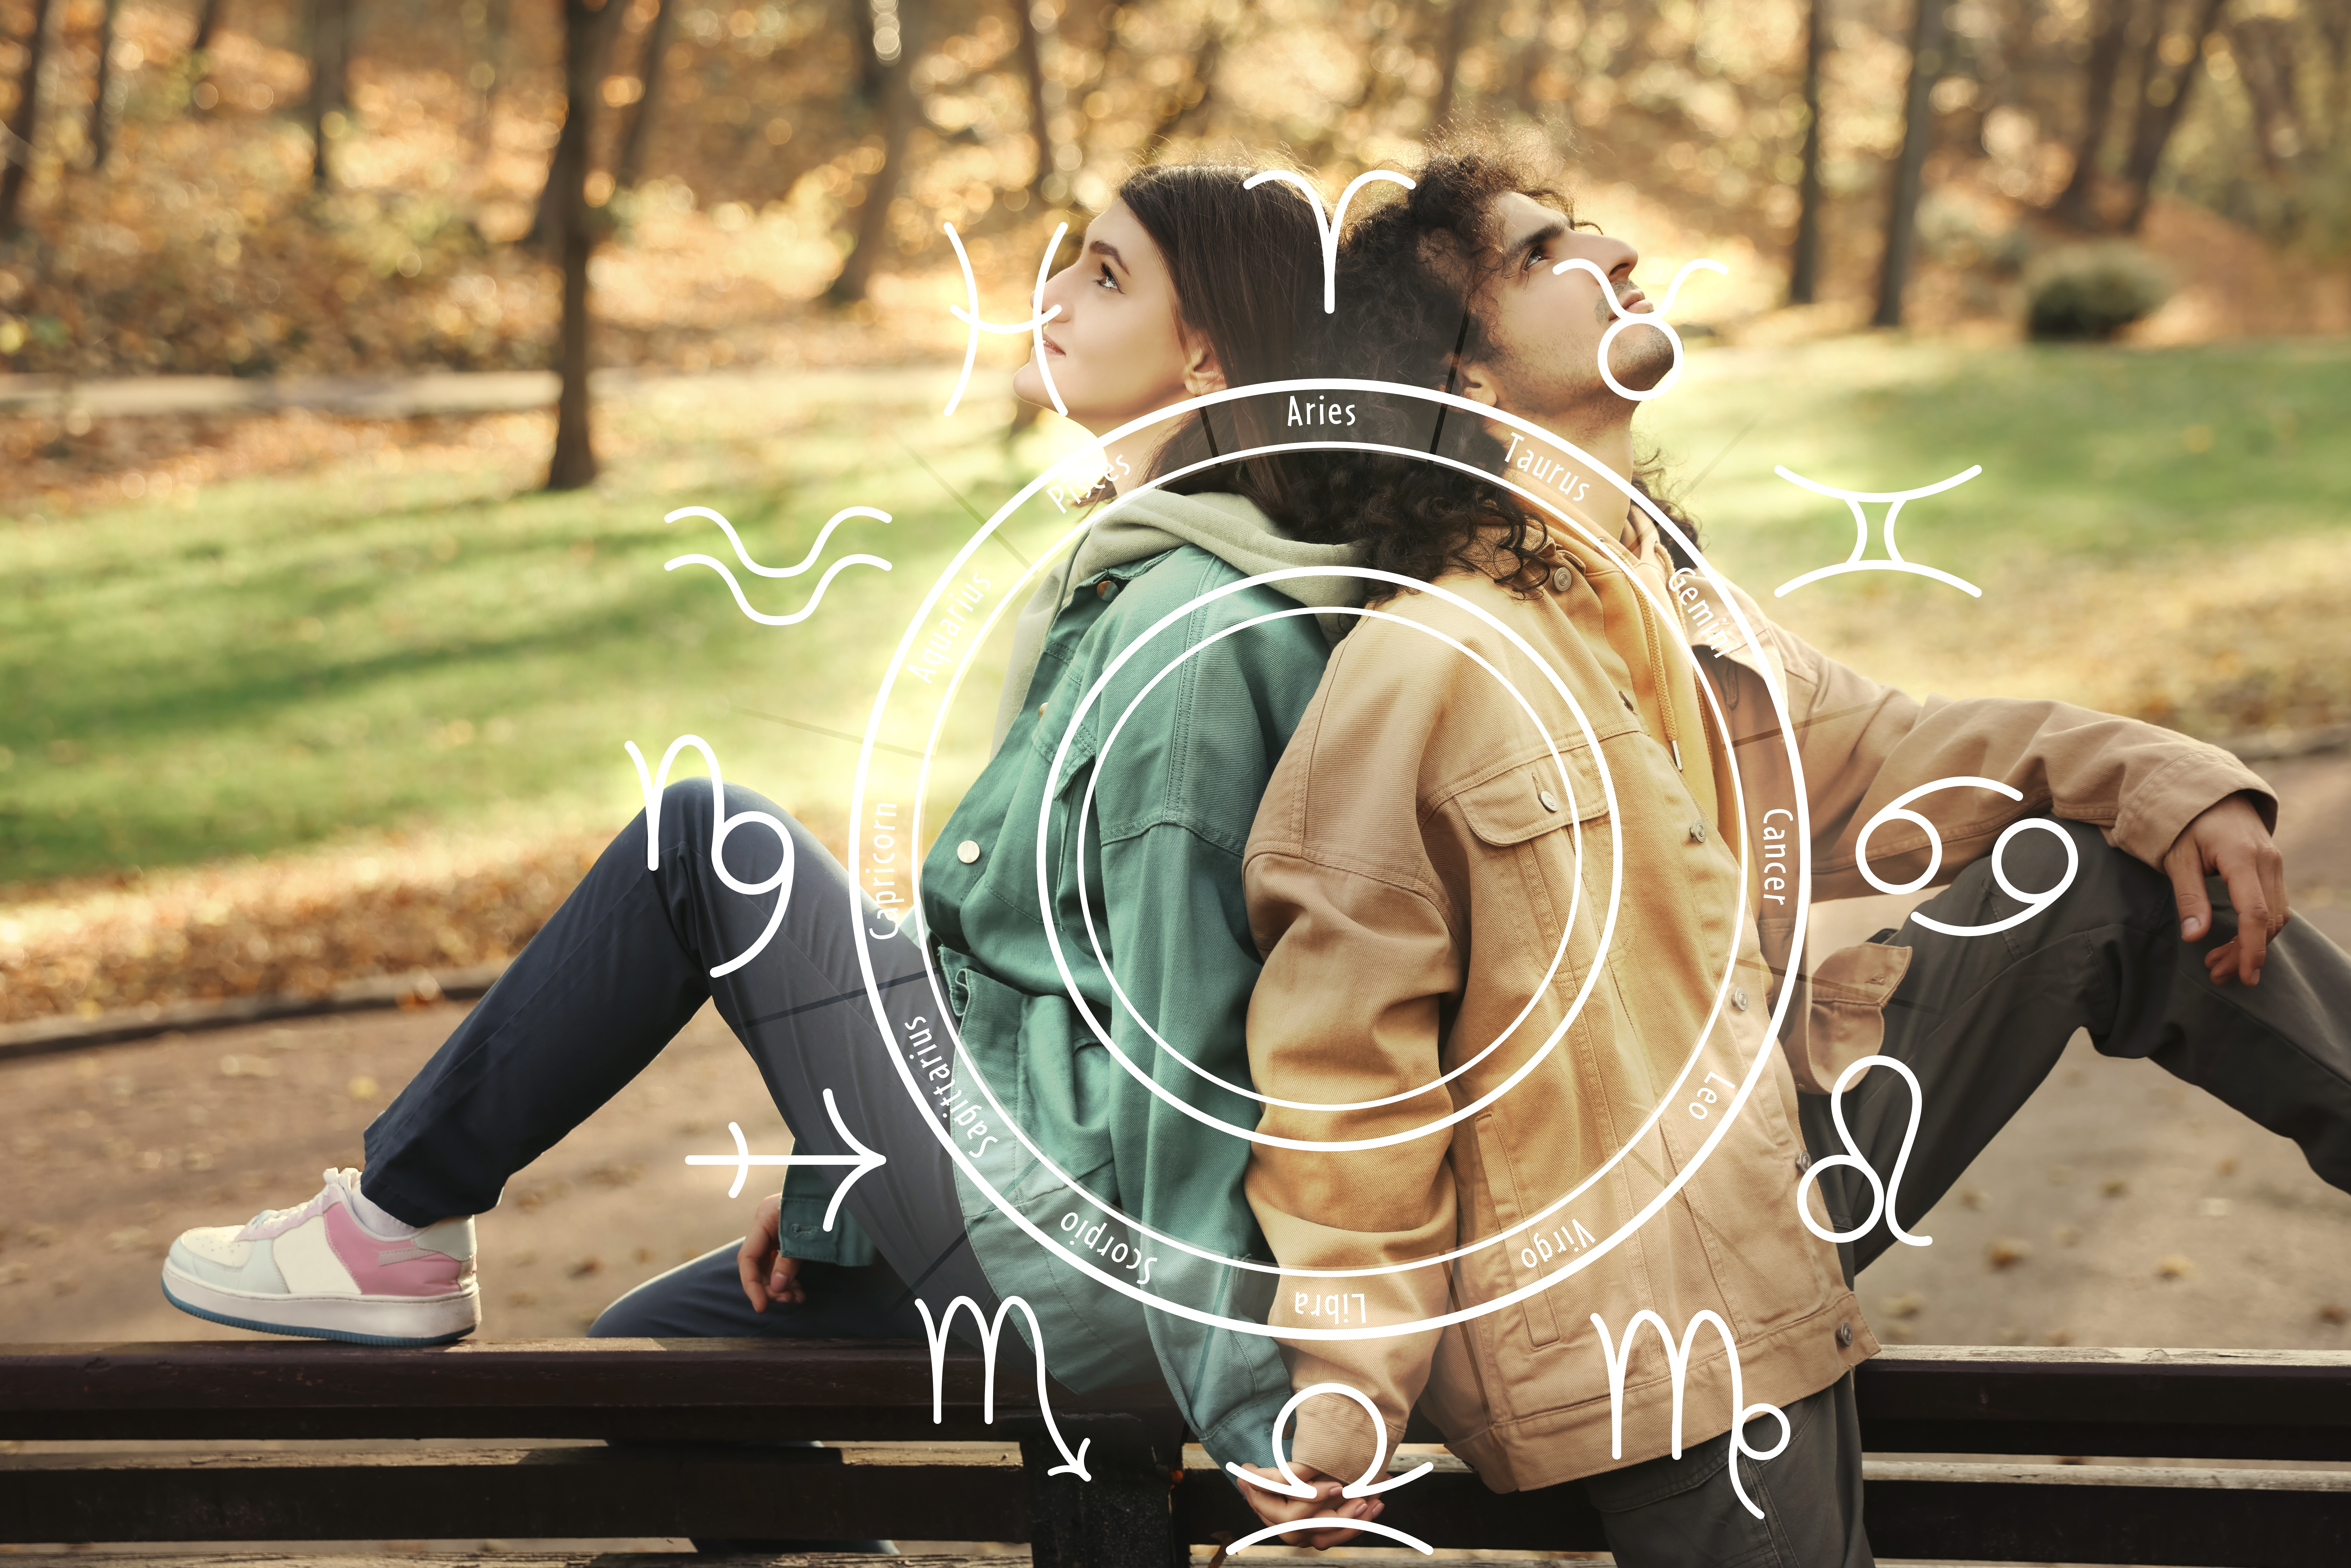 Horoscope compatibility. Loving couple outdoors and zodiac wheel | Source: Shutterstock